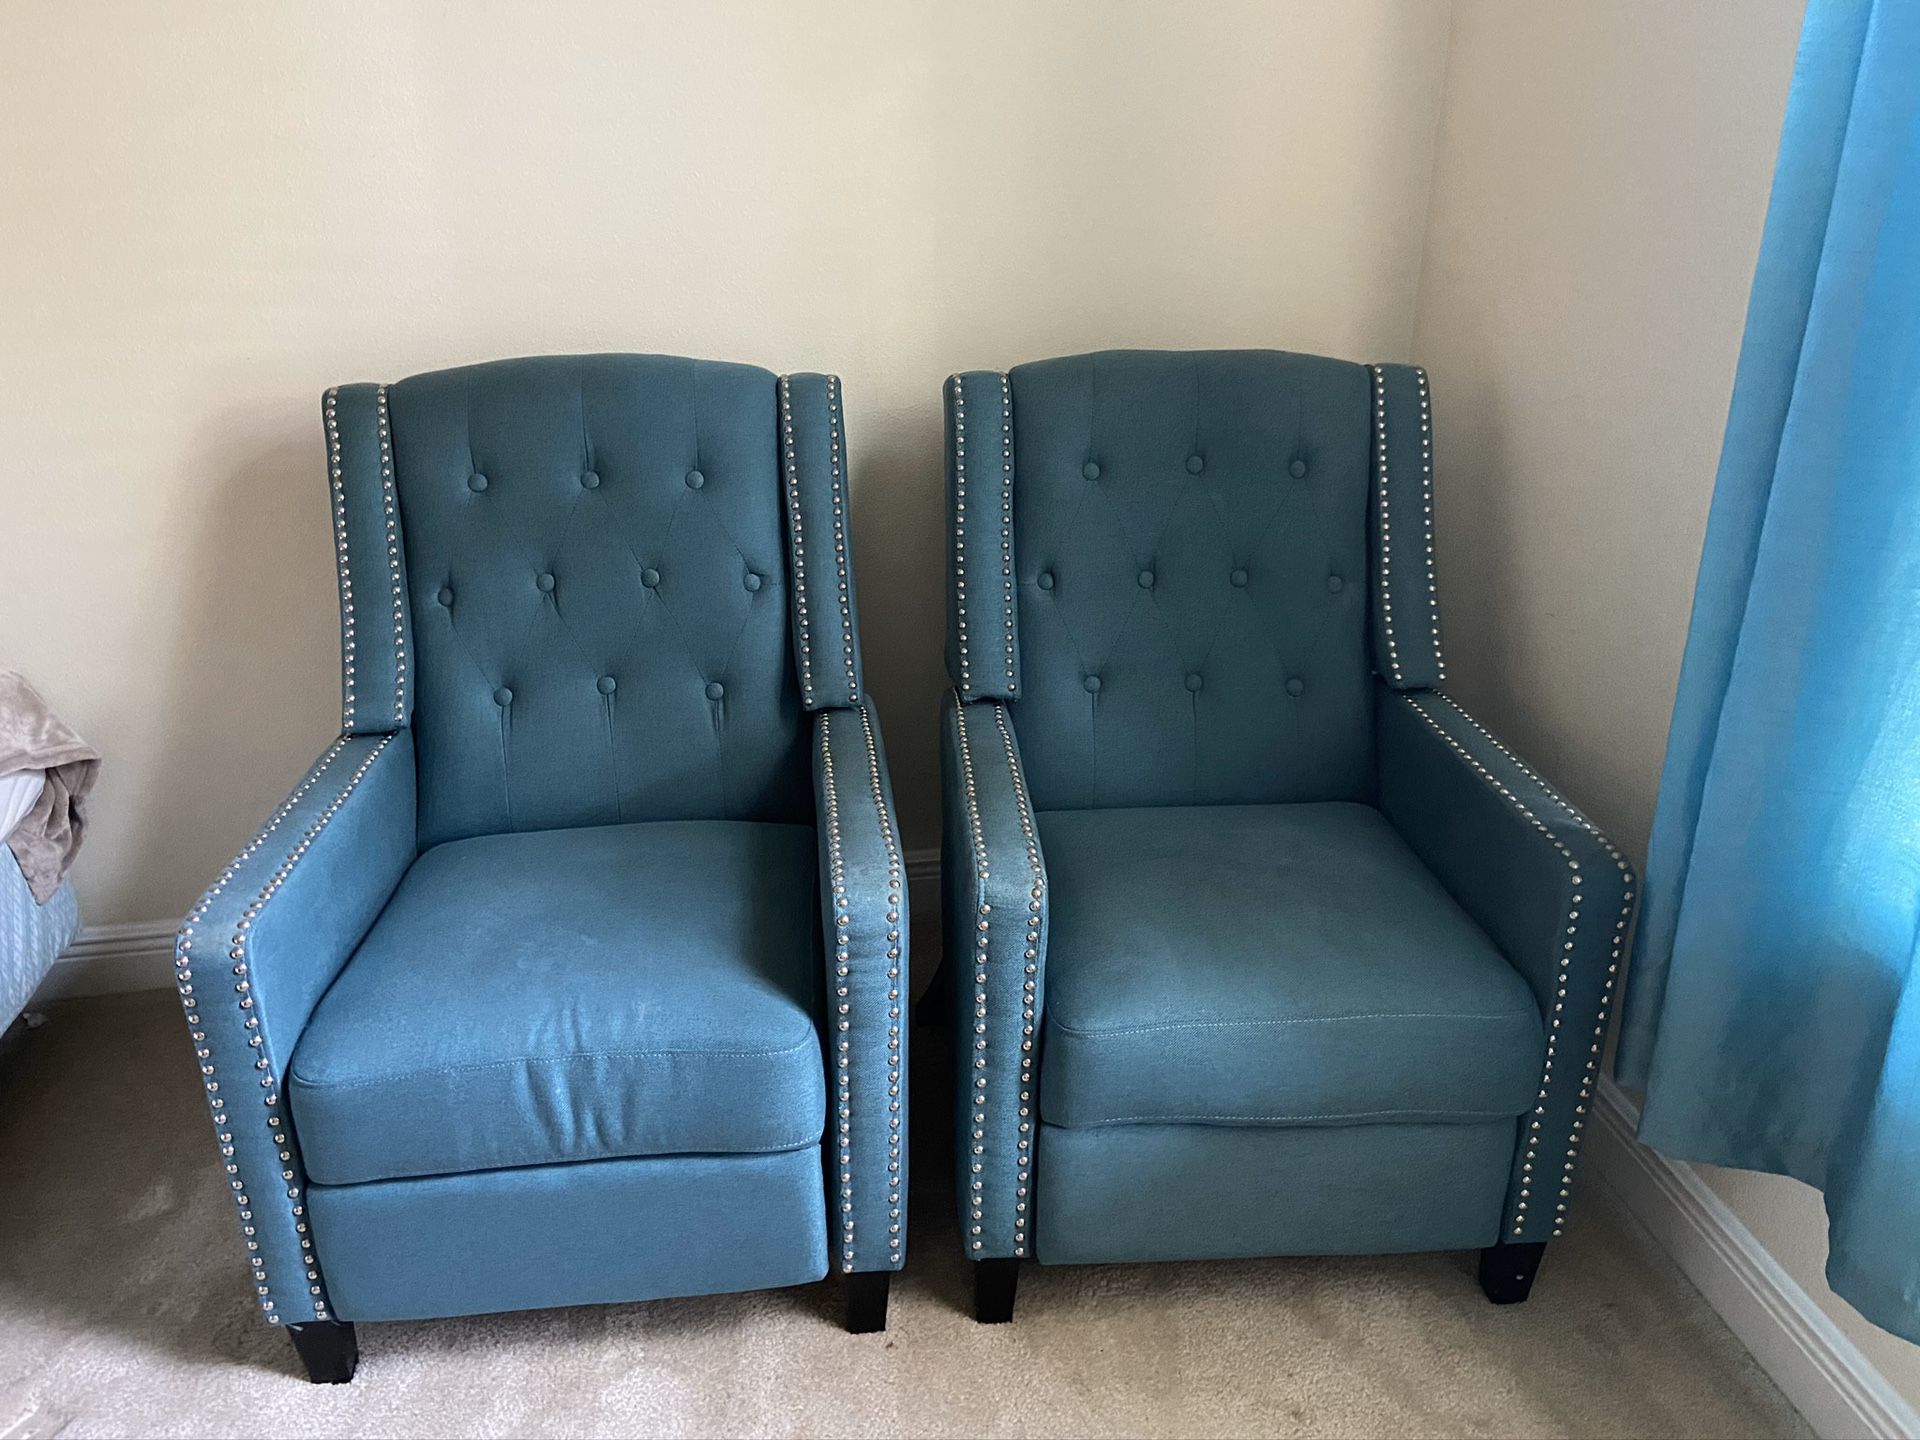 Recliners teal studded